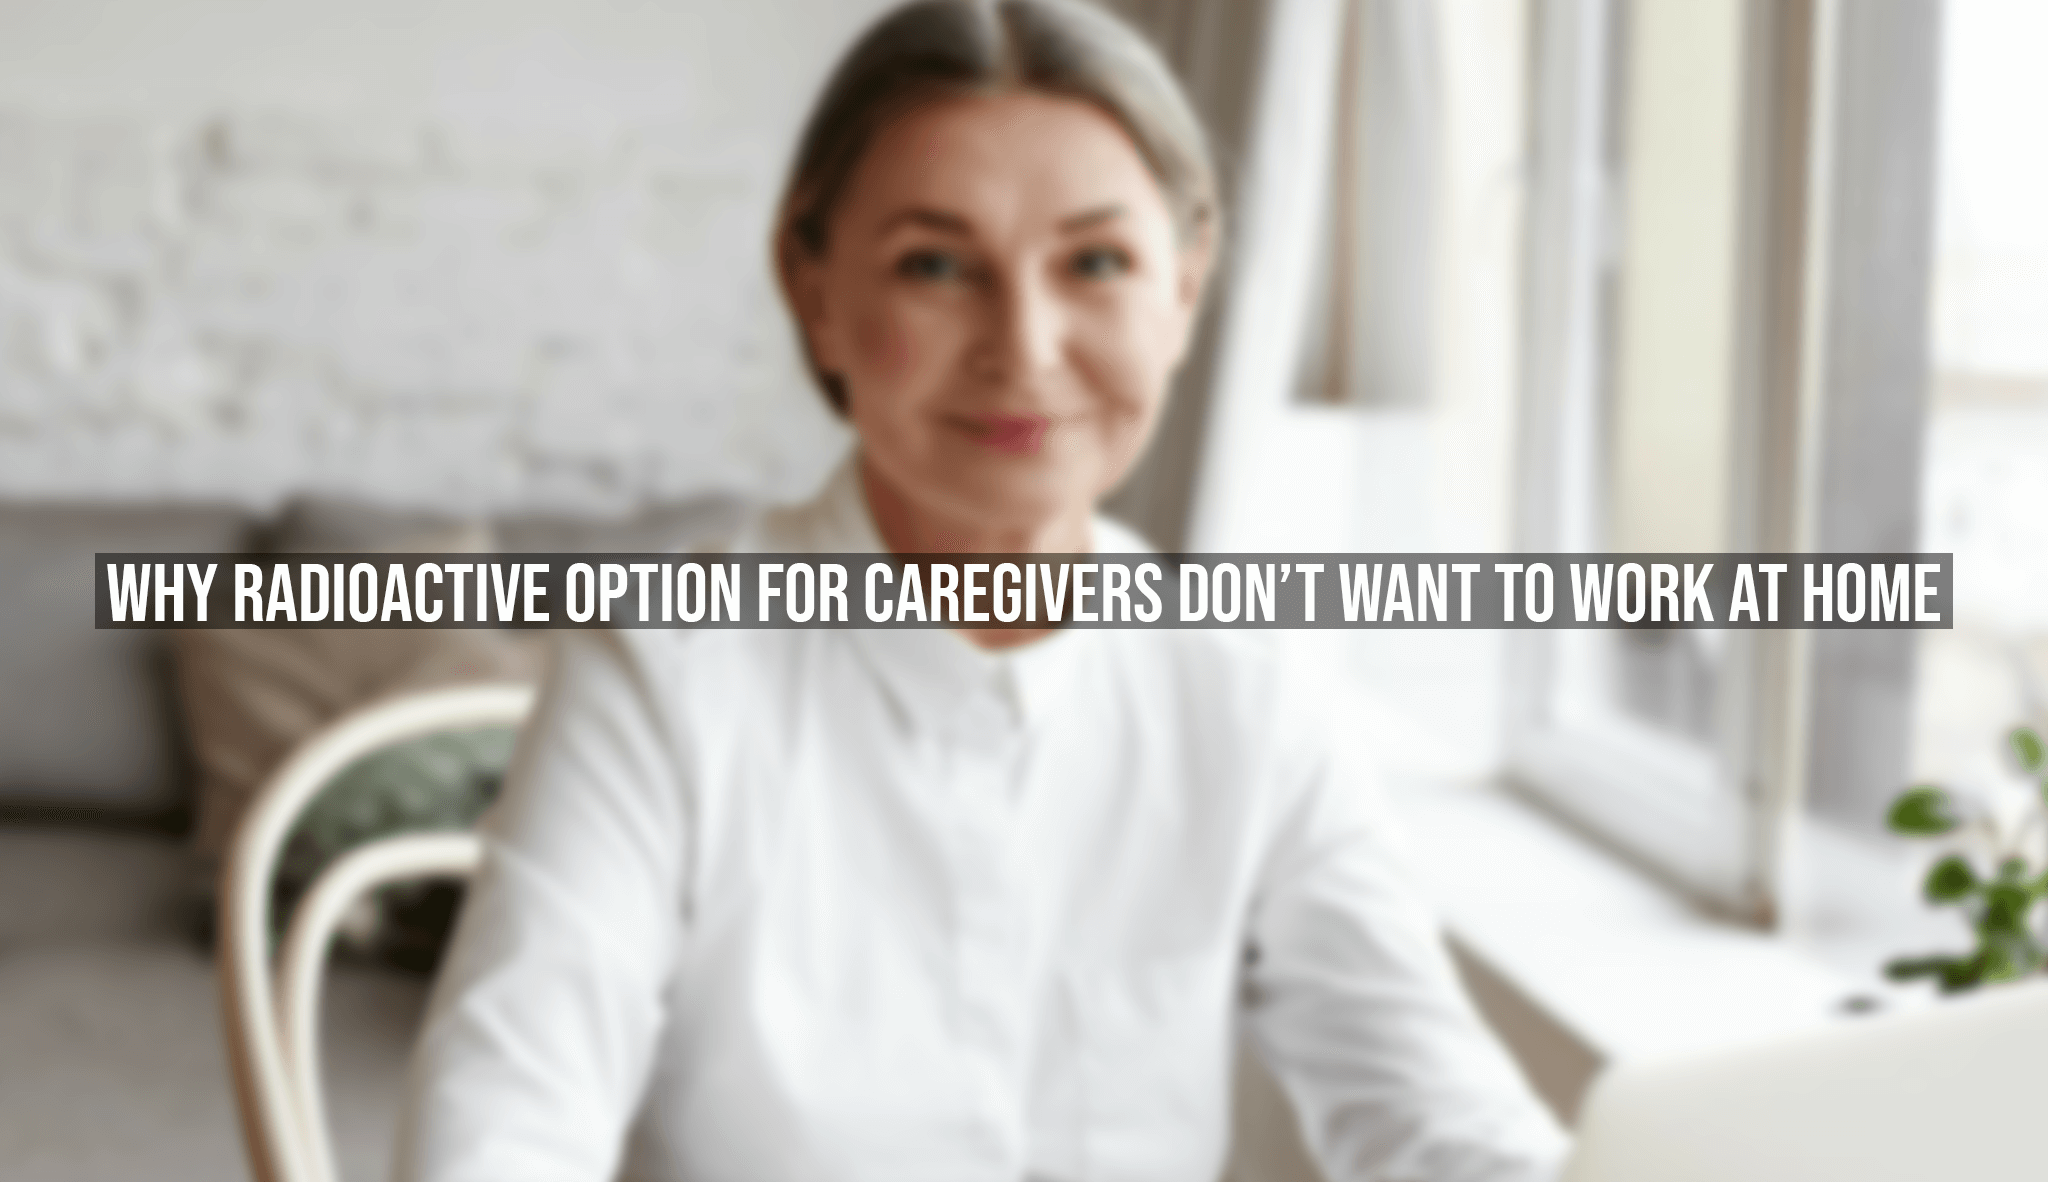 Why Radioactive Option for Caregivers Don't Want To Work At Home